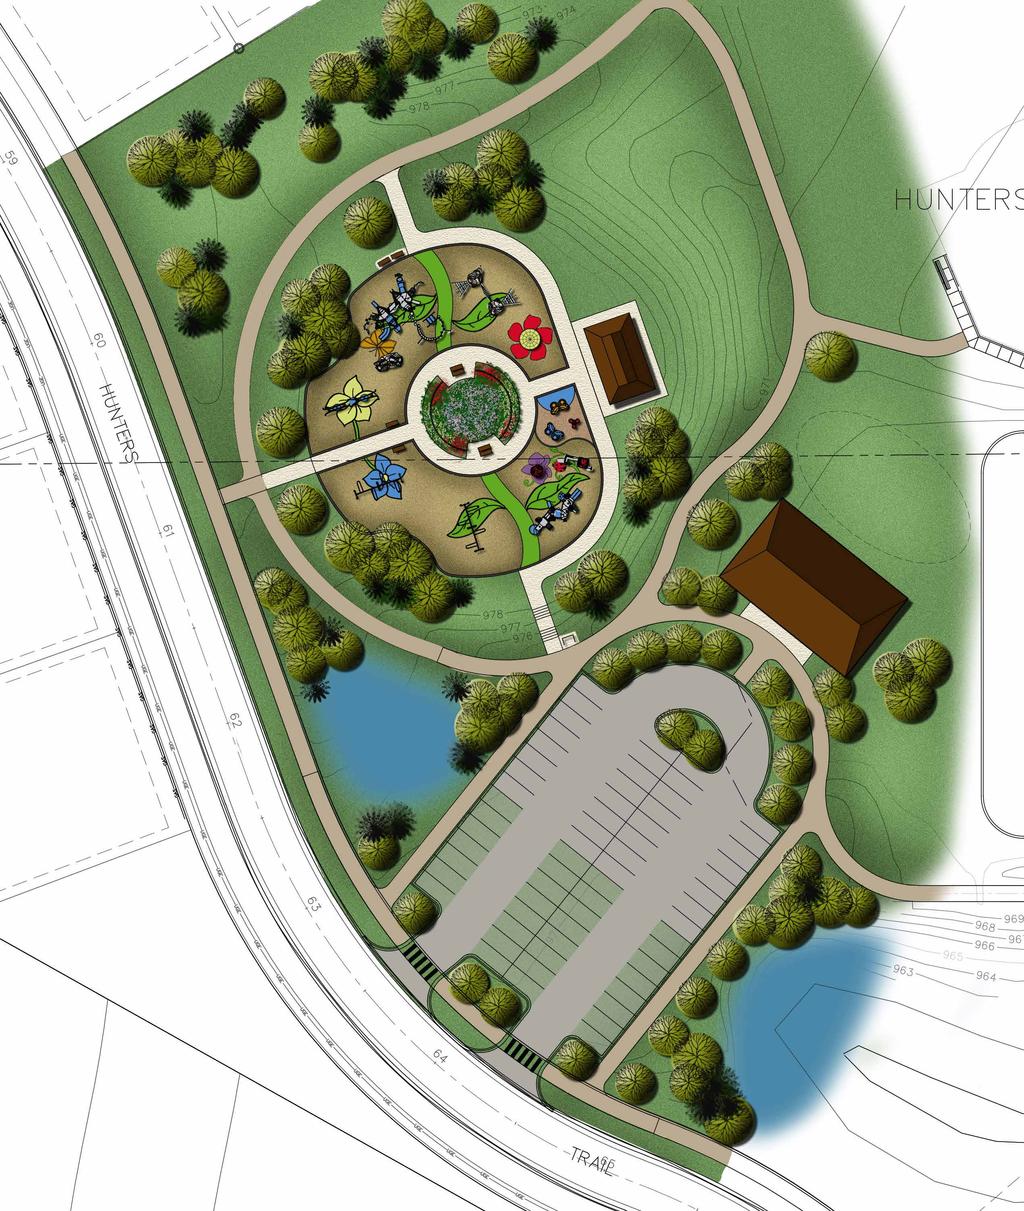 Lisle Park Concept 2 5 5 4 6 2 1 4 3 7 11 12 INITIAL CENTRAL ISLAND: Circular walkway around a central garden with various native grasses and flowers FUTURE CENTRAL ISLAND: Circular